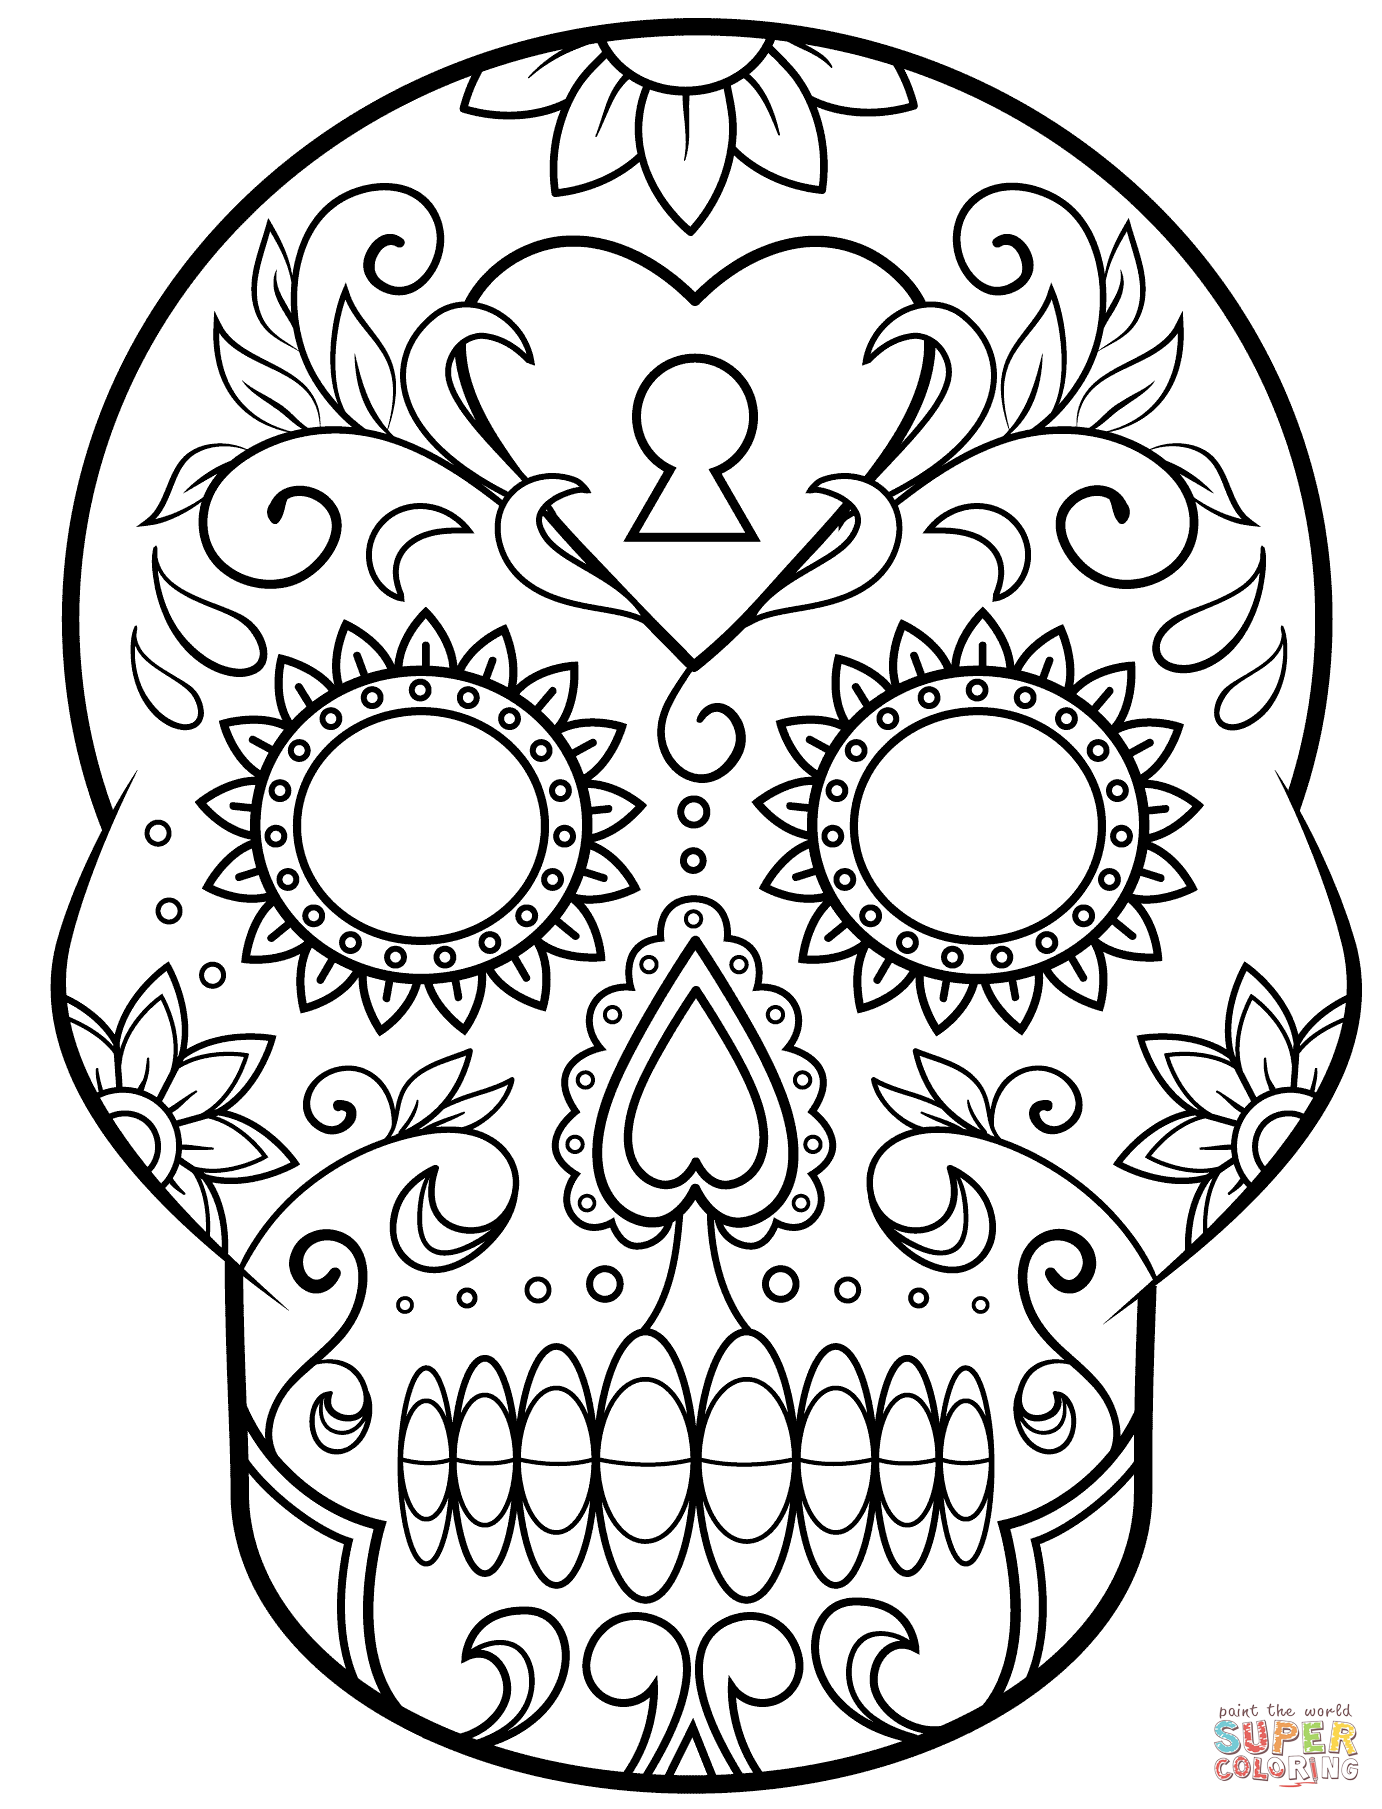 day-of-the-dead-craft-skull-designs-guide-to-family-holidays